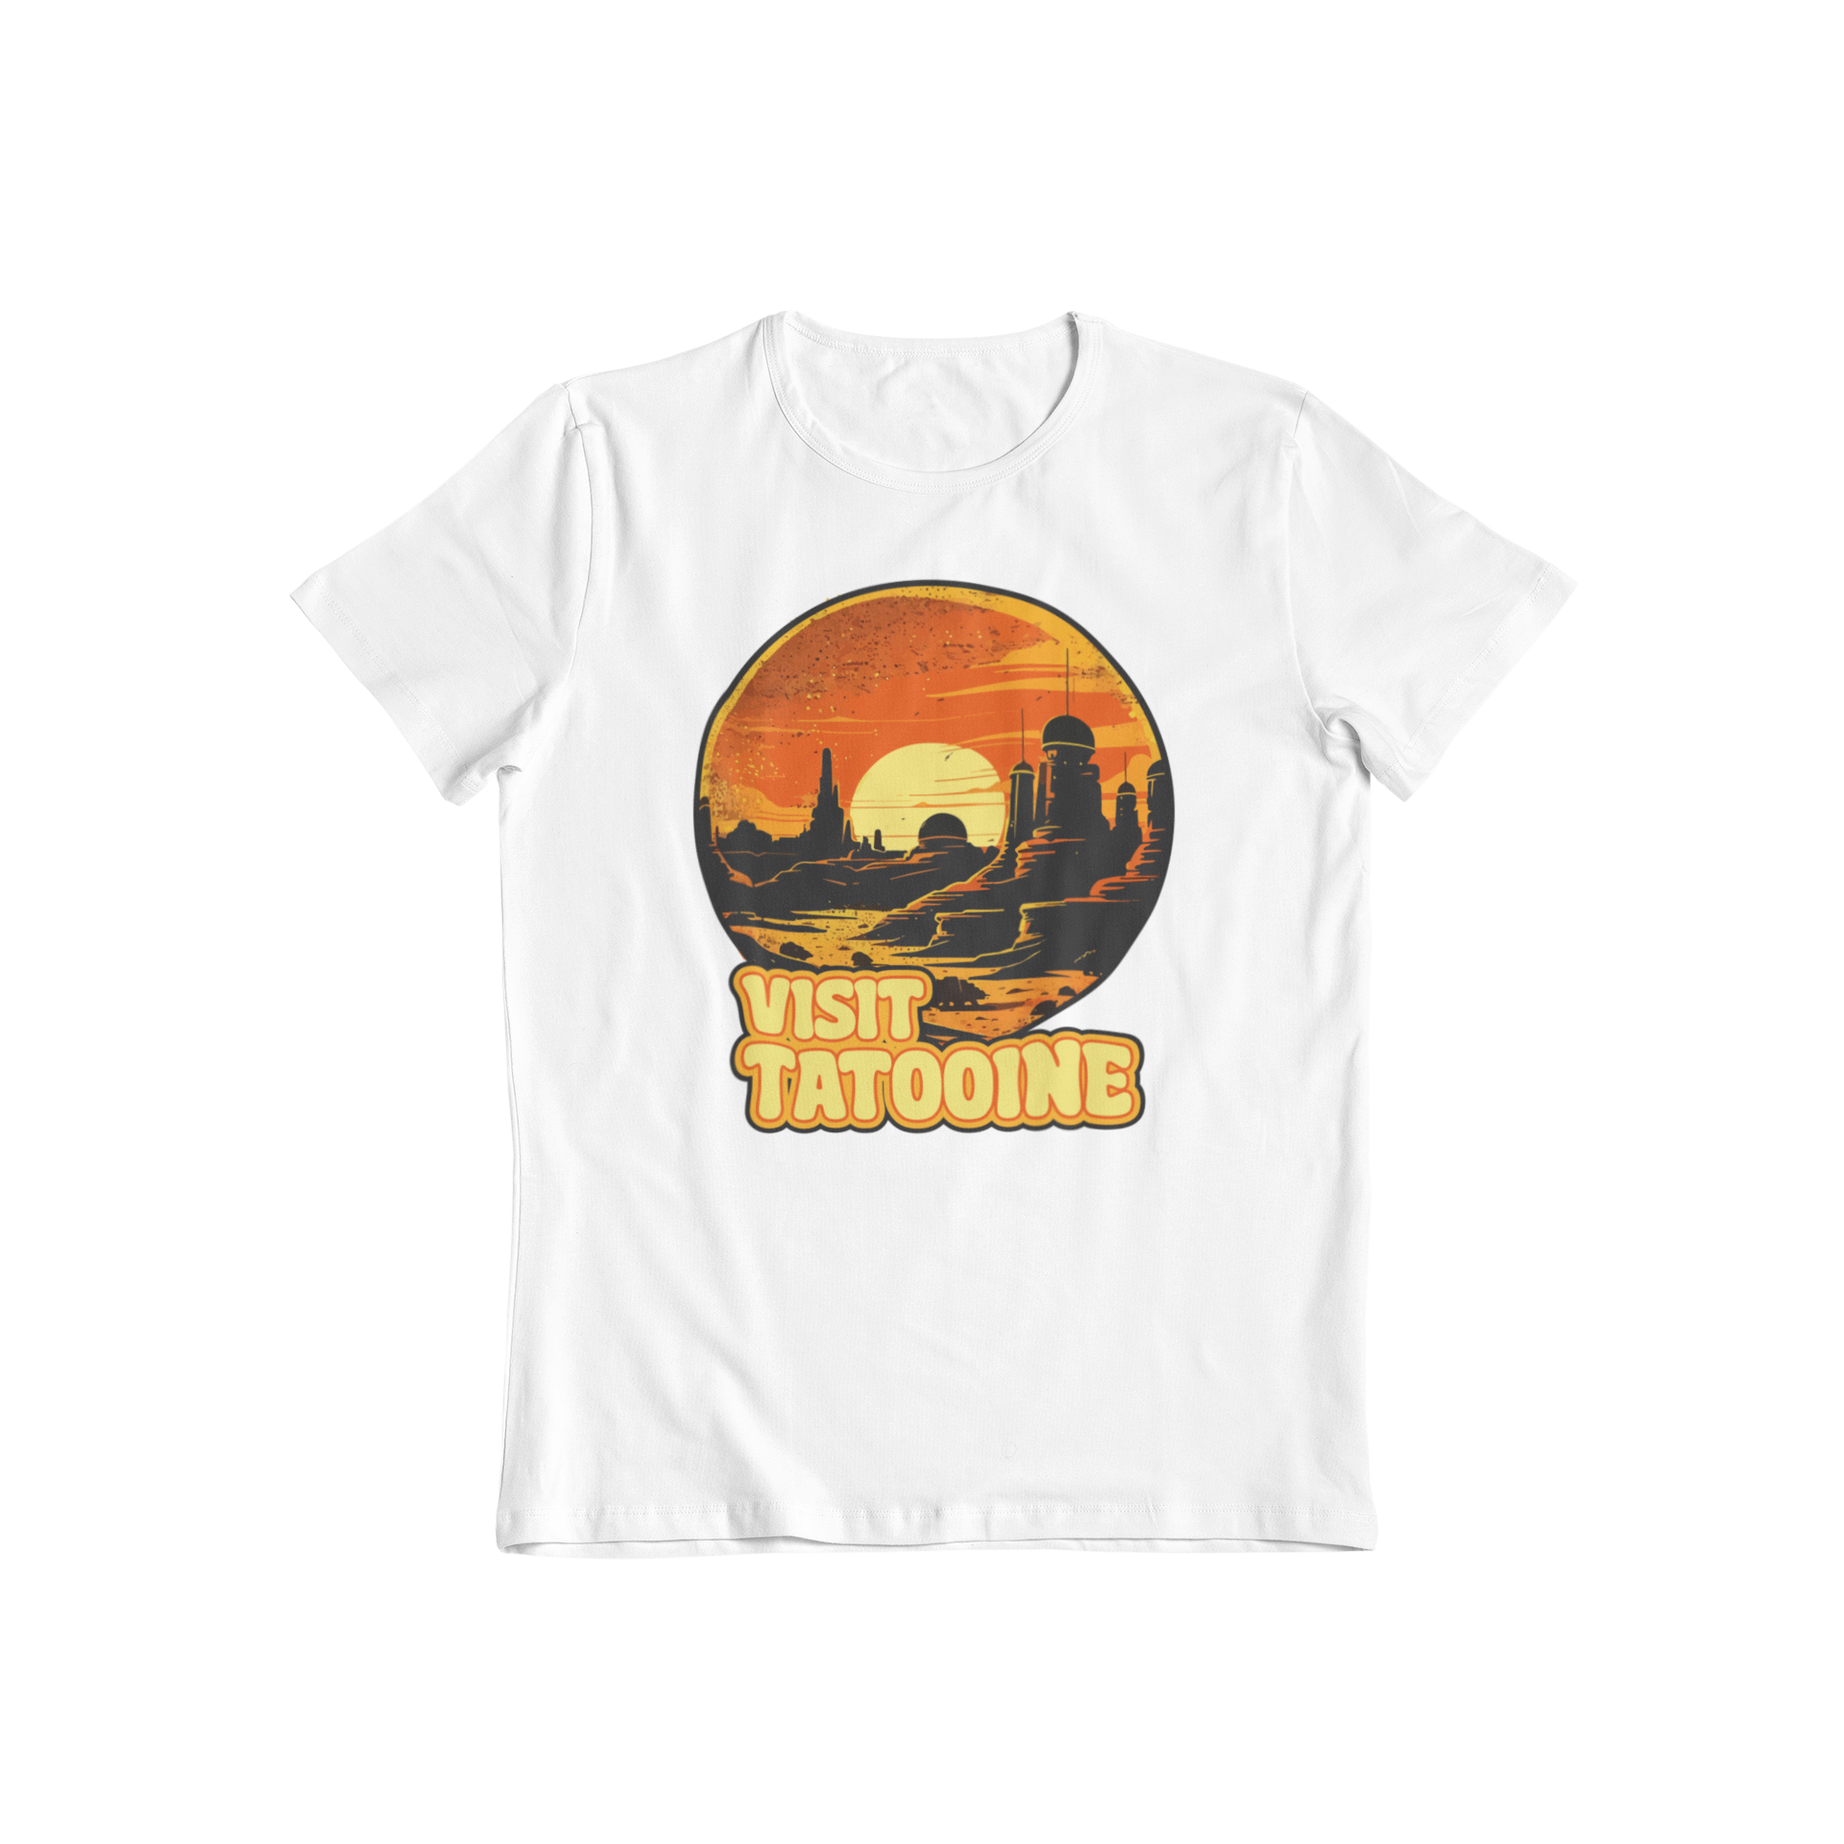 This Sci-Fi inspired t-shirt pays homage to Tatooine's rich history, as the Skywalkers once called it home. Despite its reputation as a hive of scum and villainy, Tatooine remains an intriguing destination for those seeking adventure. Grab your t-shirt now and show your support for Tatooine! 100% Unofficial Parody T-Shirt